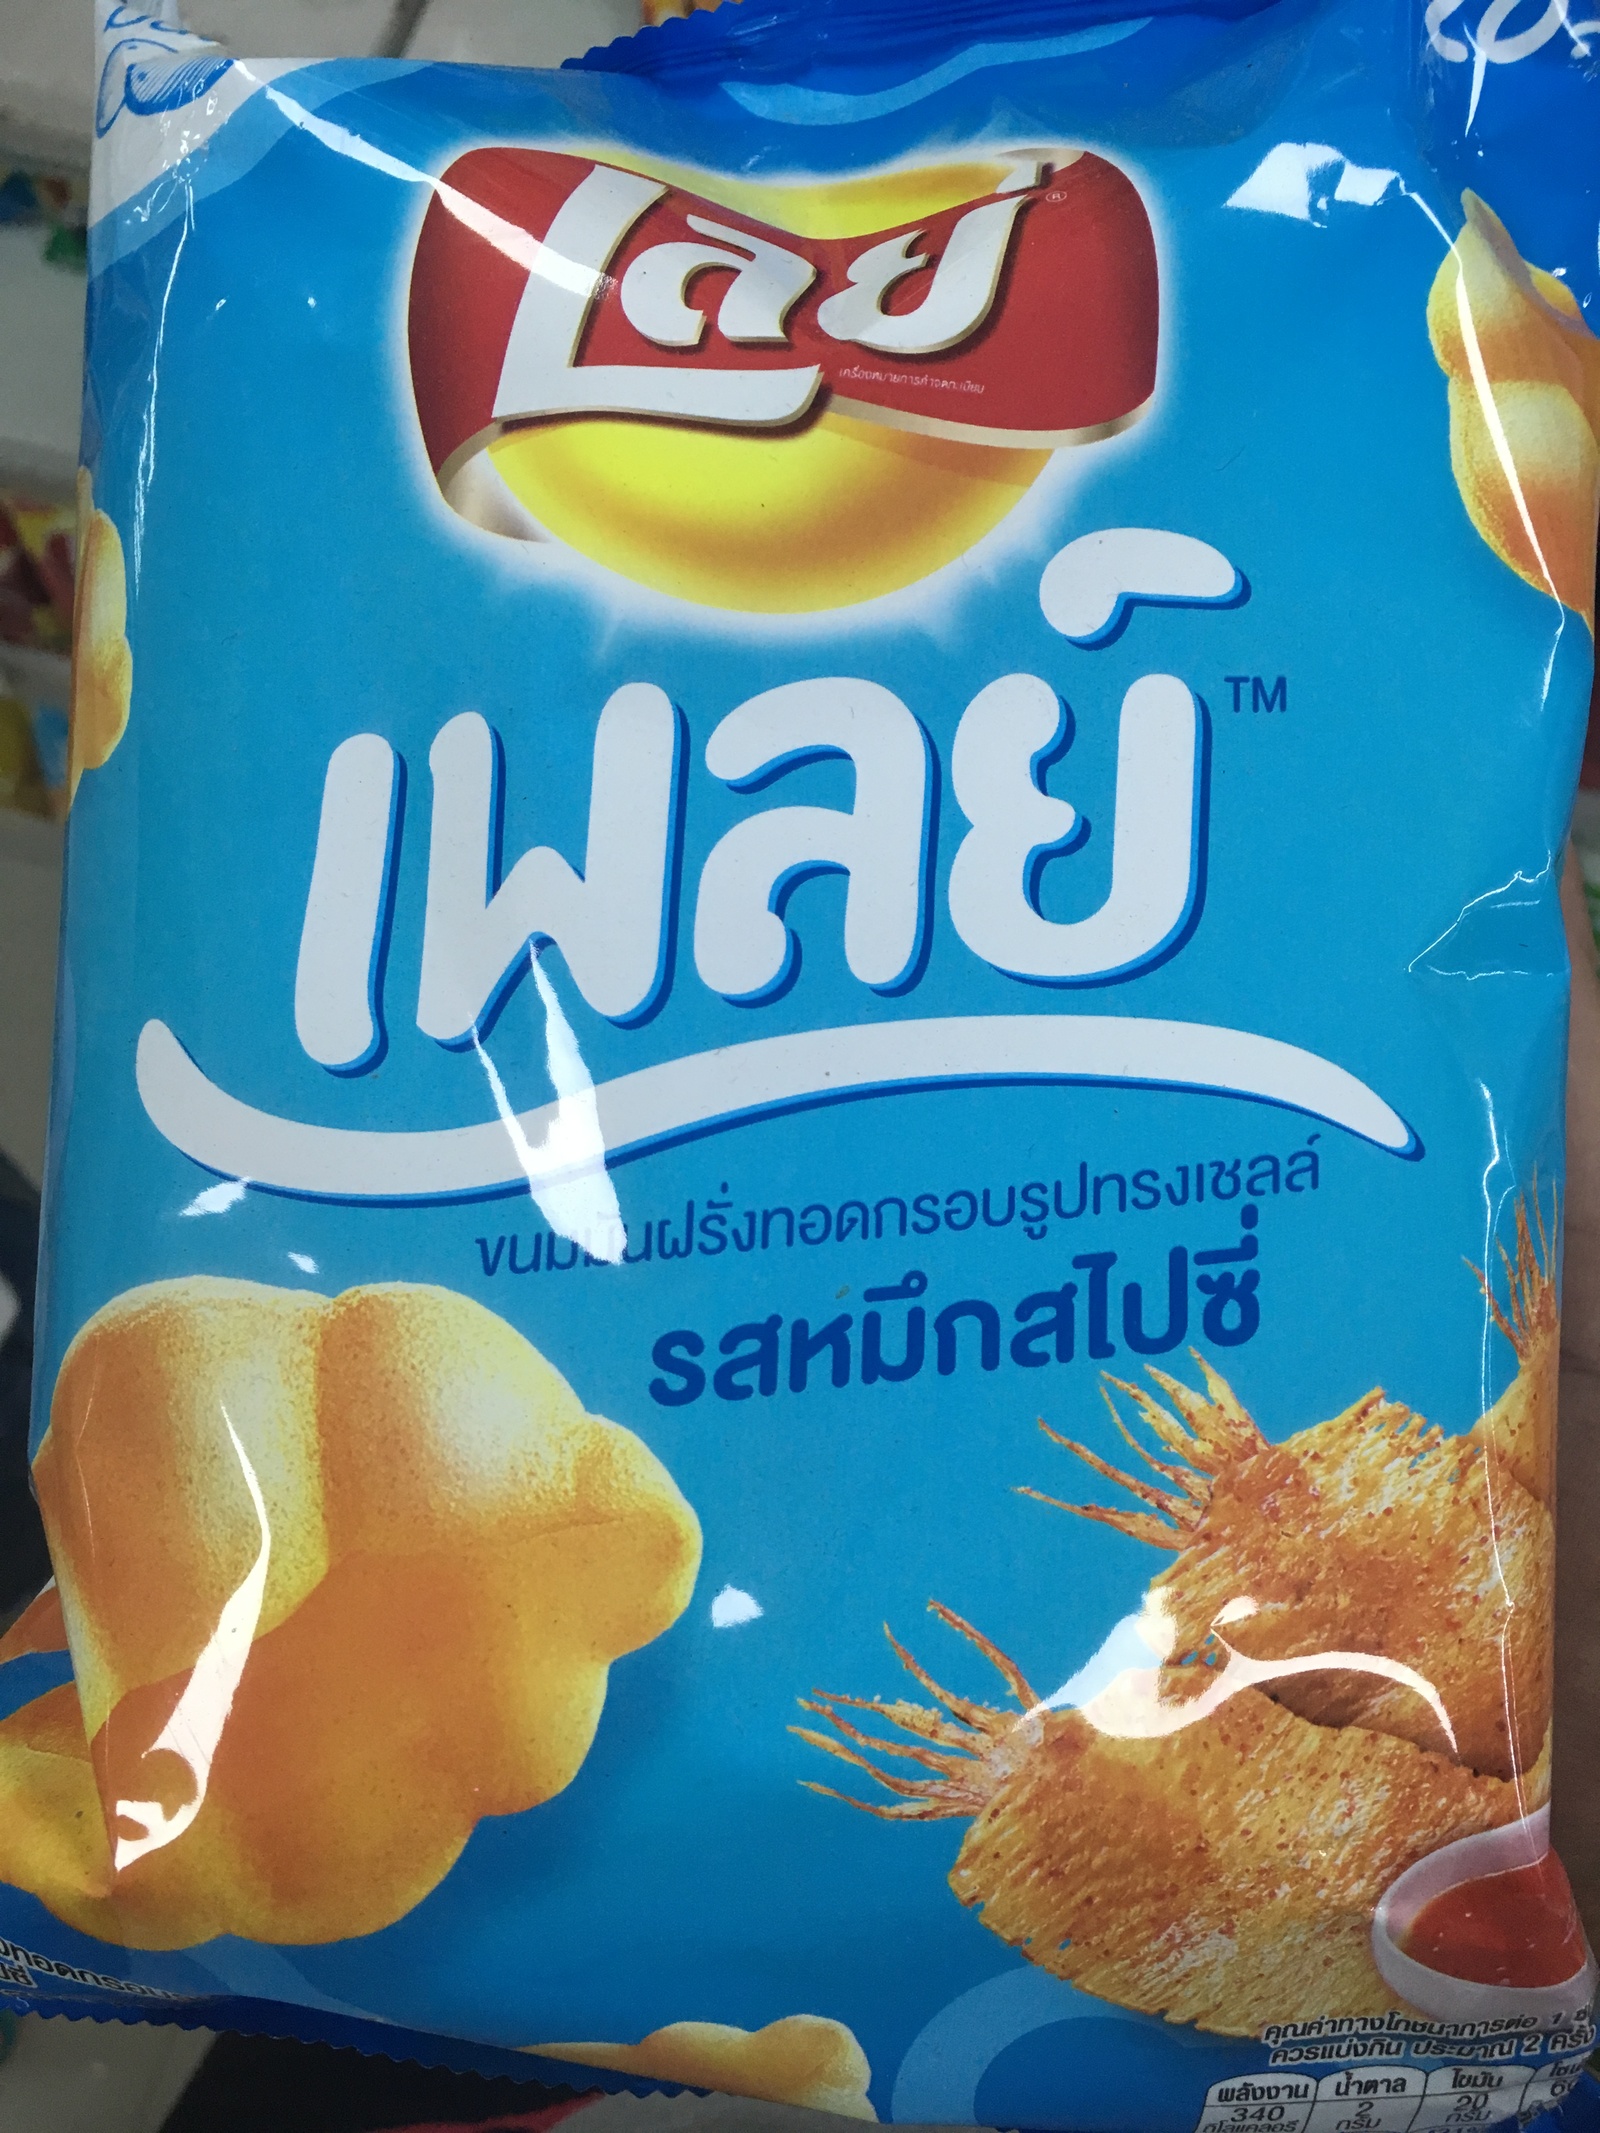 About chips in Thailand - My, Crisps, Sea, Flavors, Food, Fancy food, Crunch, Potato, Longpost